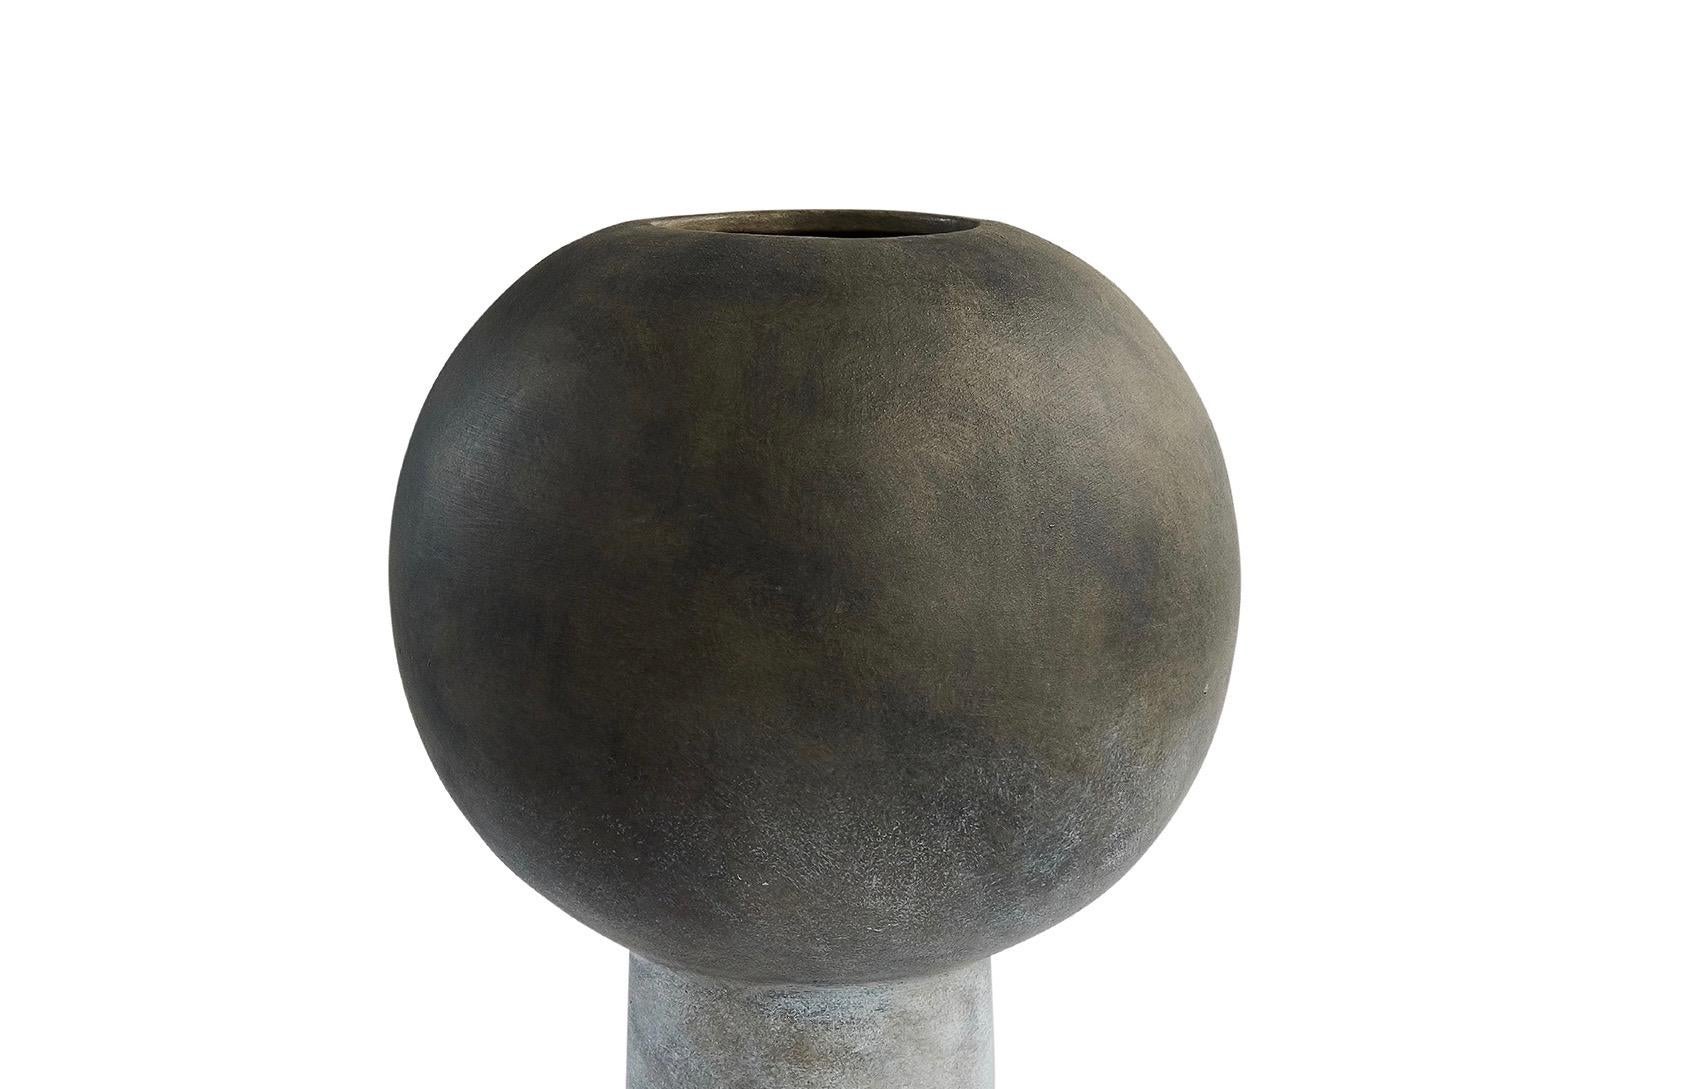 Contemporary Danish design tall matte grey ceramic vase.
Globe shaped top with single tubular base.
Smaller version available S5613
Two available and sold individually.
